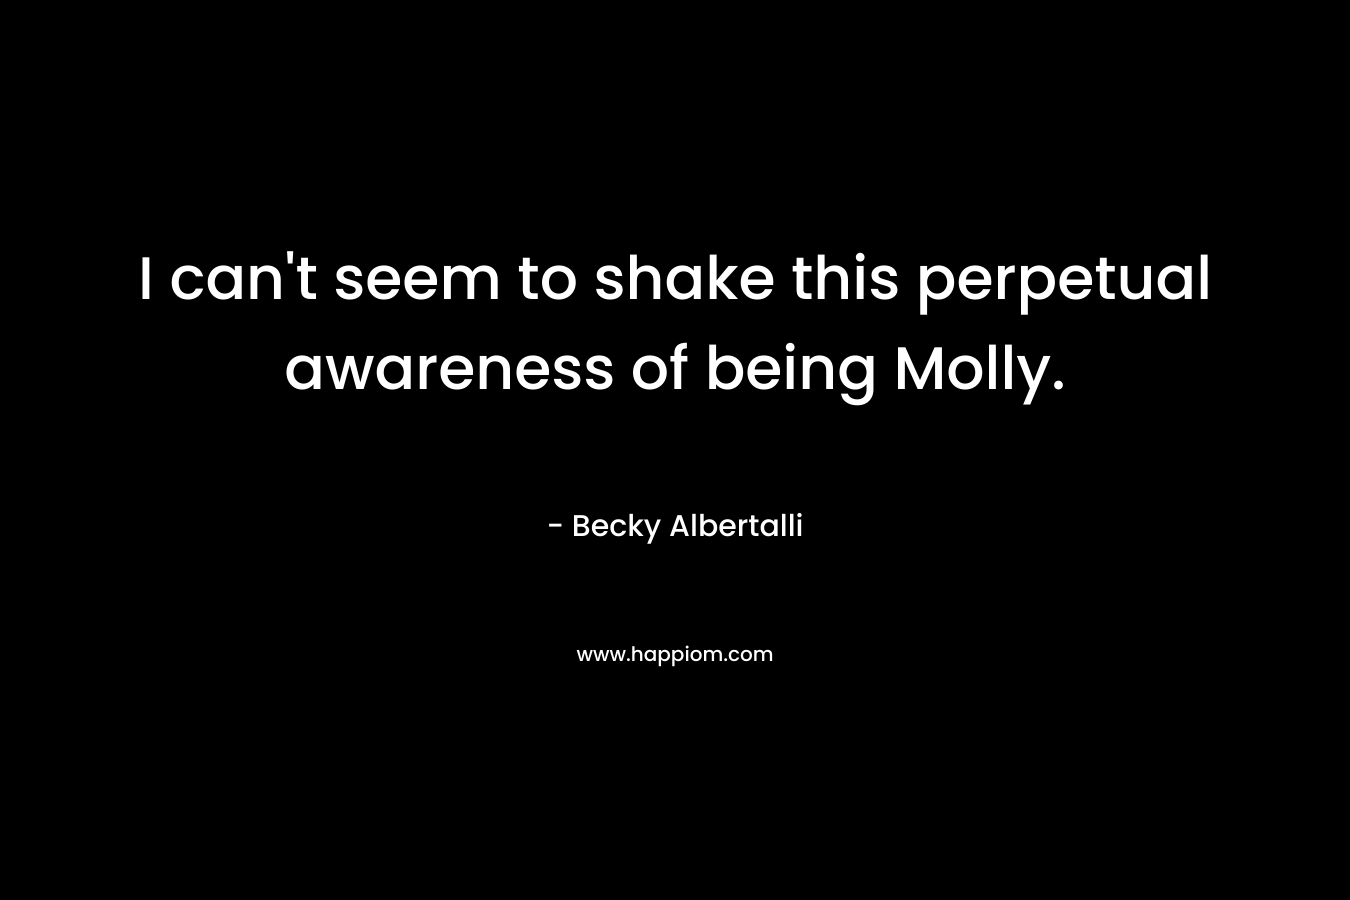 I can’t seem to shake this perpetual awareness of being Molly. – Becky Albertalli